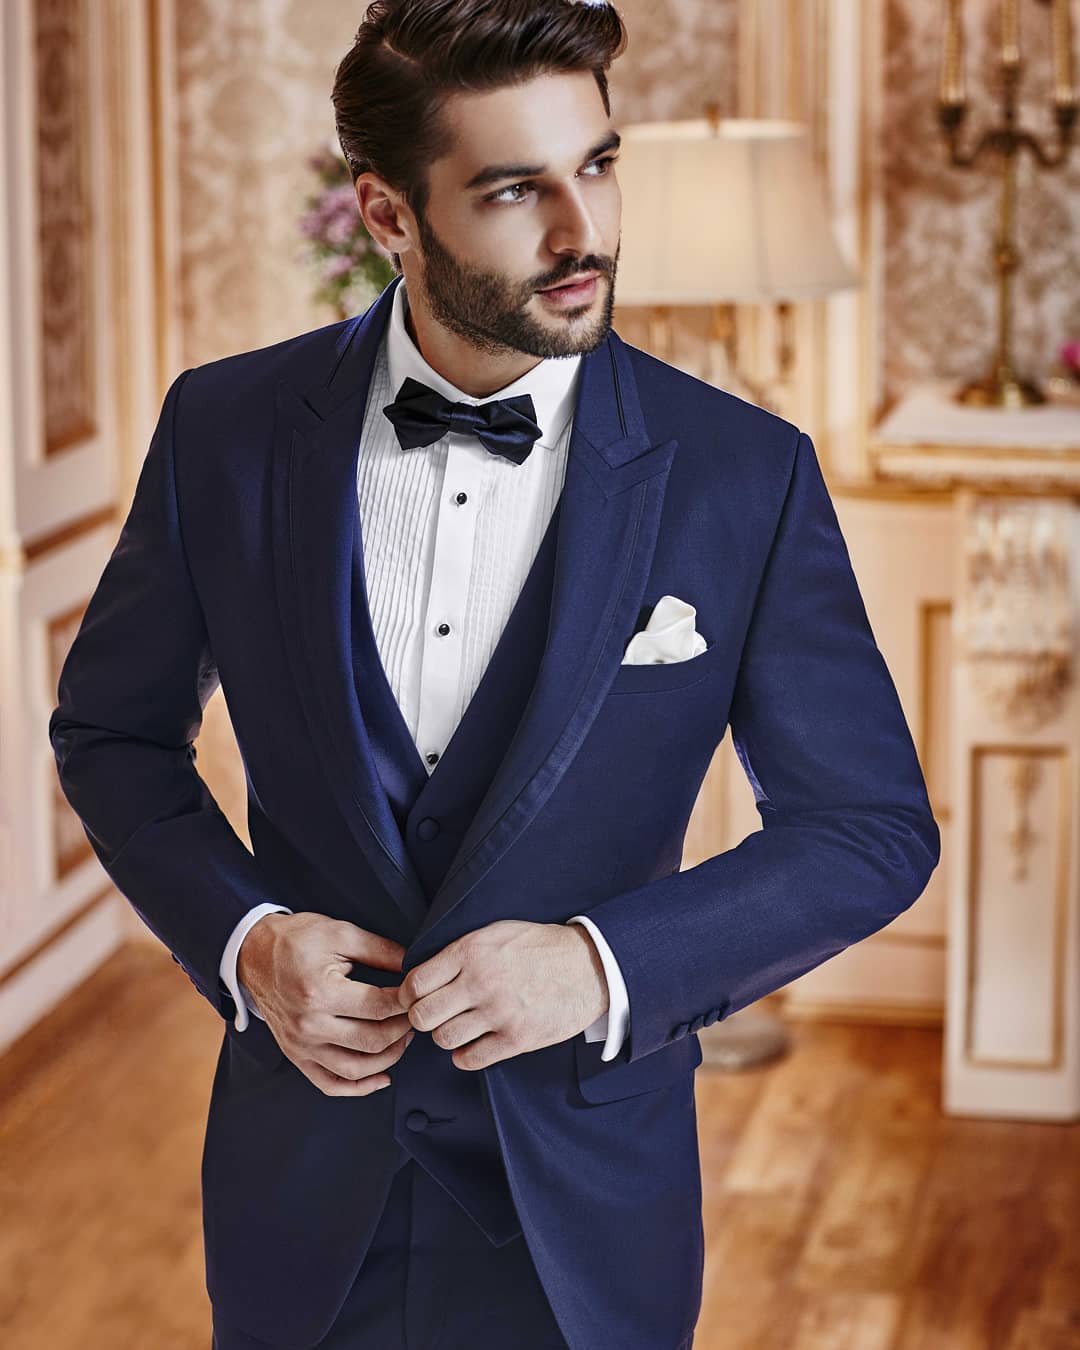 The Arvind Store,  fashioningpossibilities, madetofit, madetowear, tailormade, fashionclothes, menswear, mensfashion, mensstyle, mensoutfit, fashionformen, suitup, suited, suitstyle, tailoredsuit, finefabric, thearvindstore